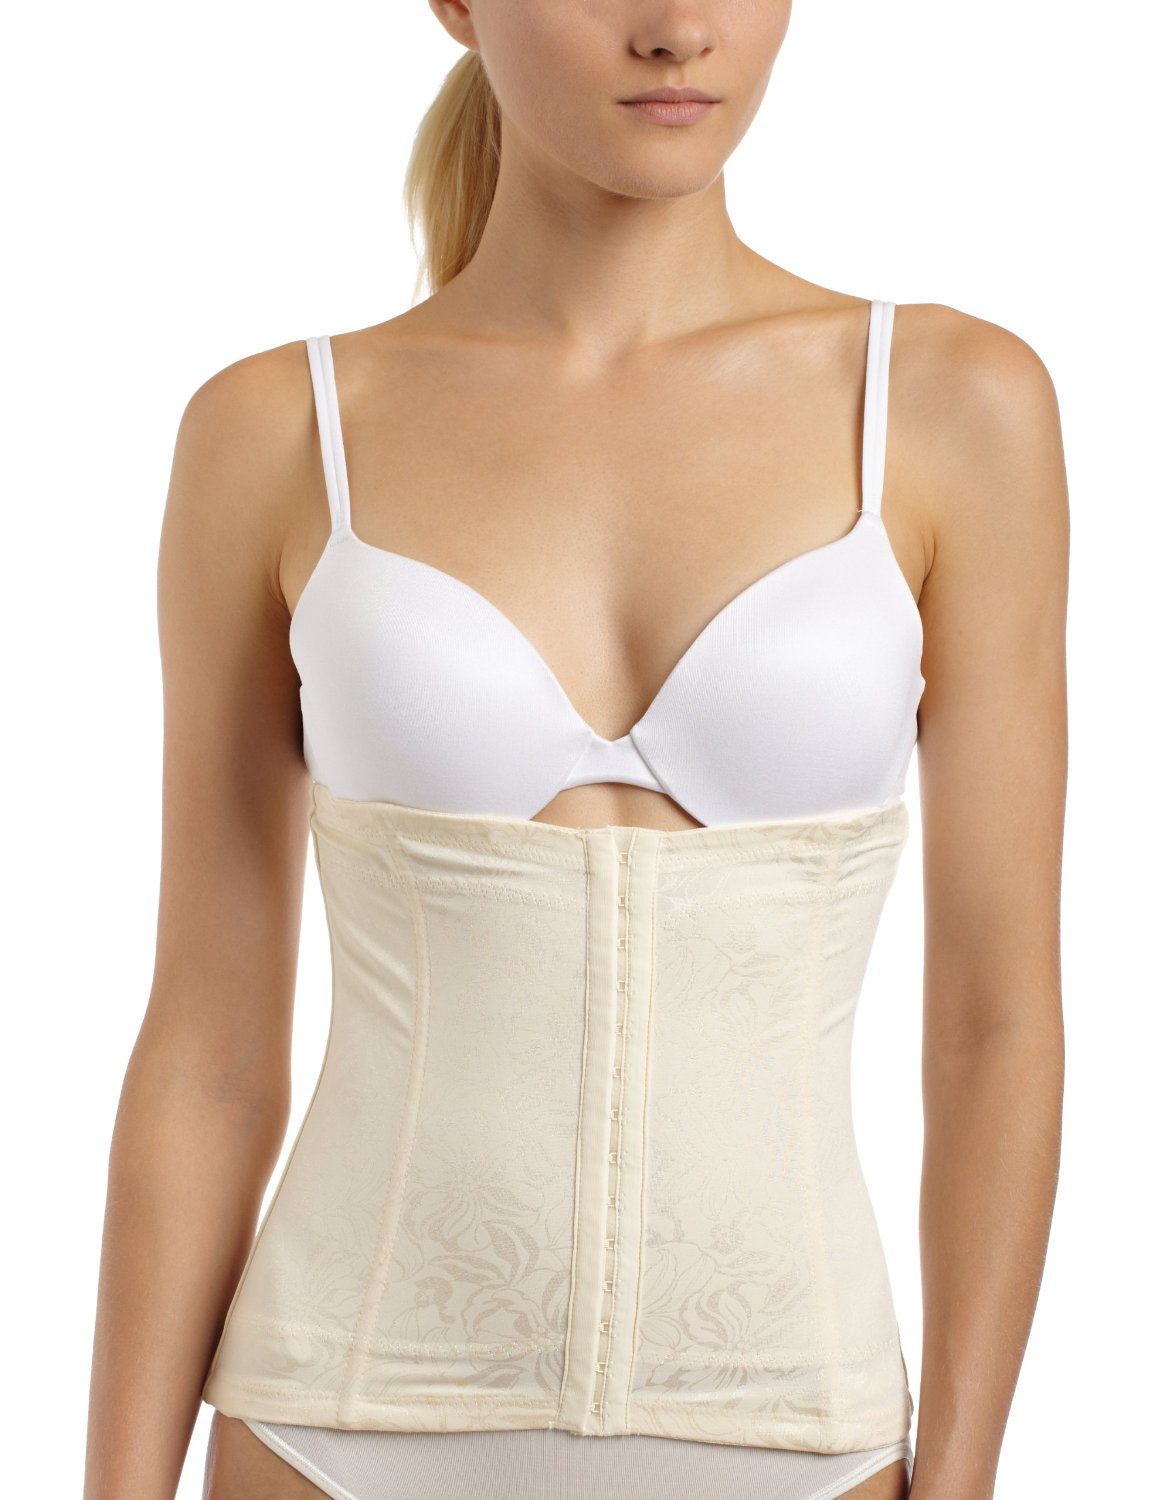 Maidenform Flexees Fat Free Dressing Firm Control Camisole - Women's